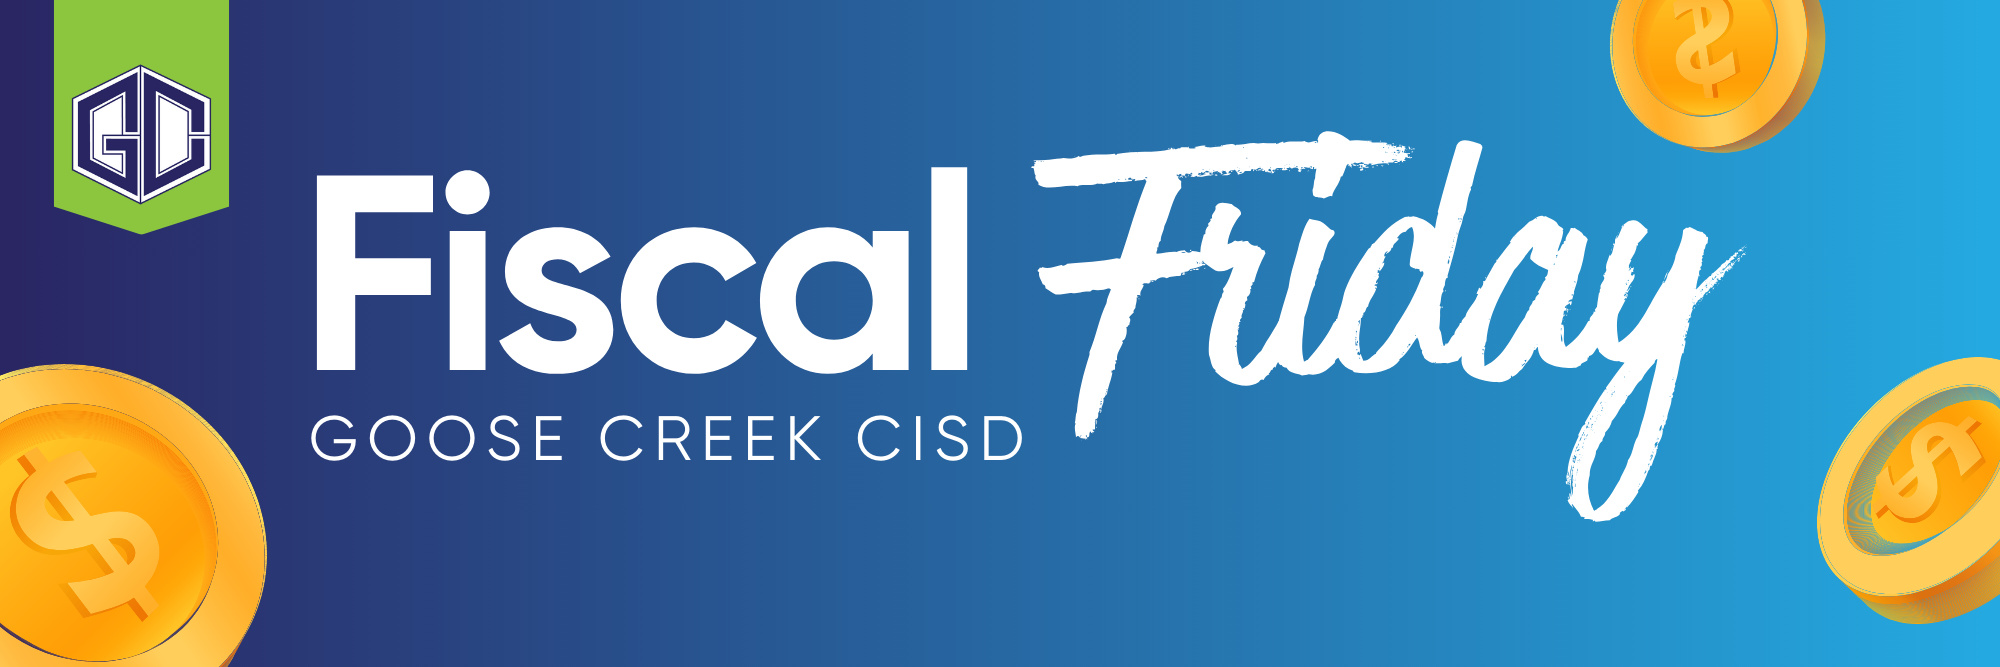 Fiscal Friday presented by Goose Creek CISD